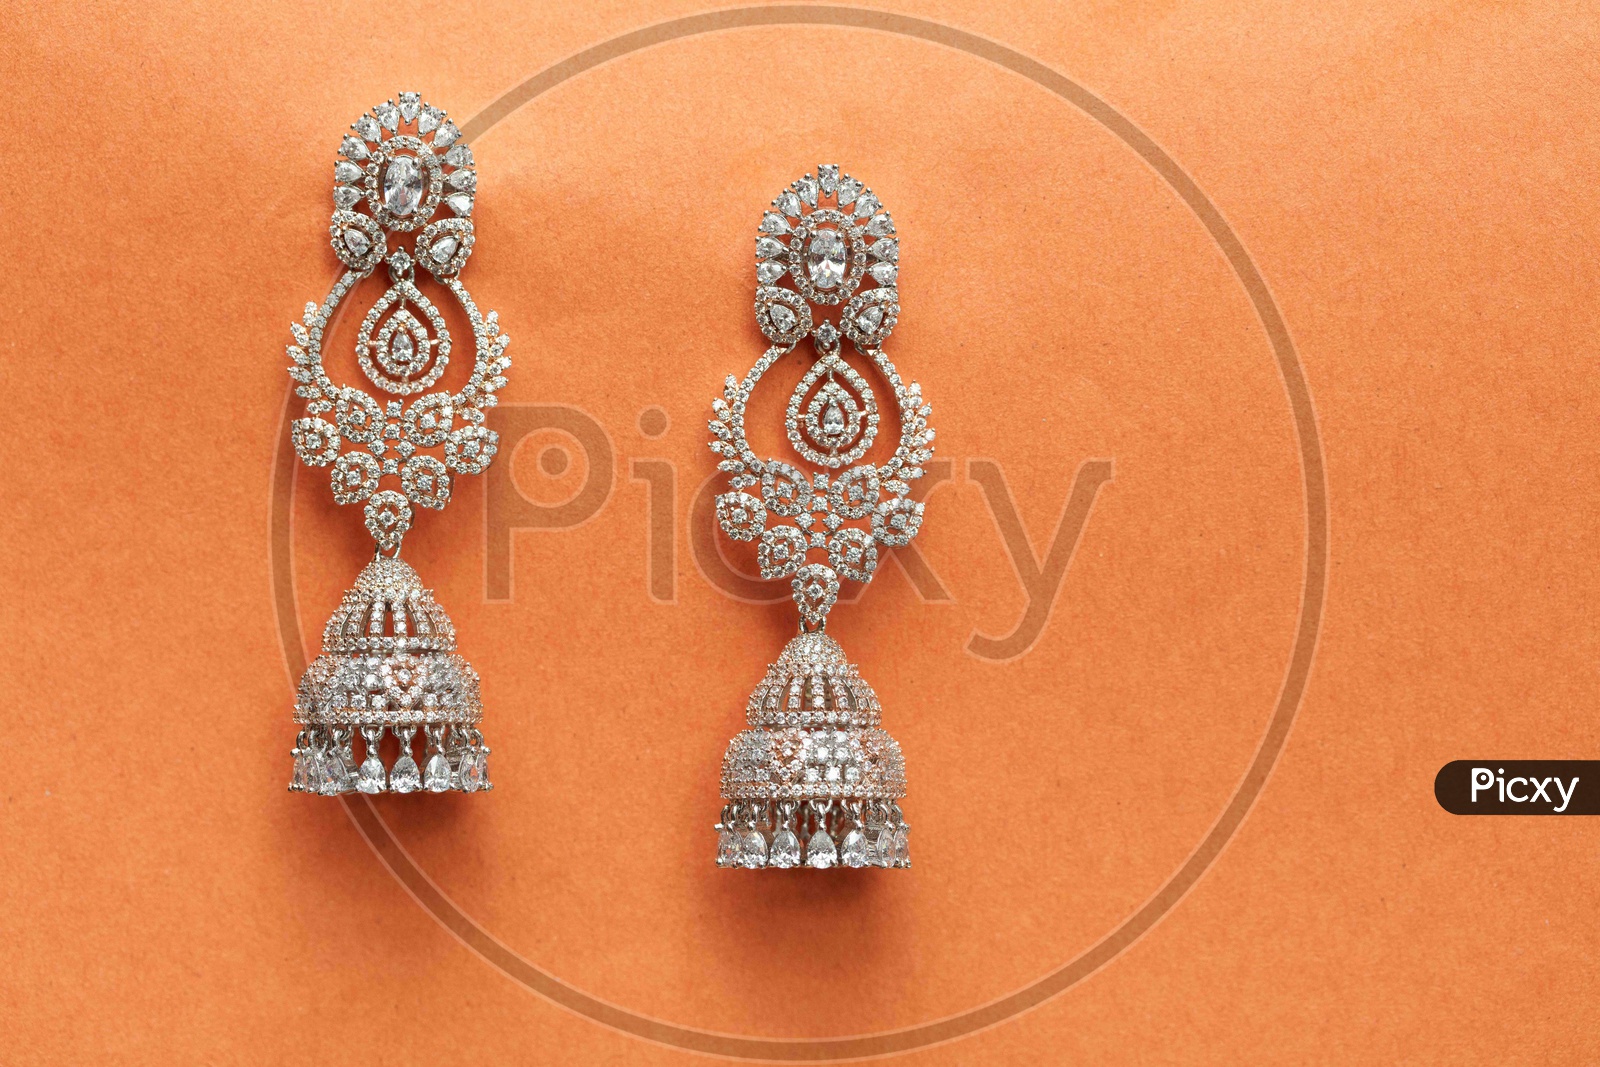 Buy Fida Ethnic Traditional White Stone Studded Gold Colour Small Jhumka  Hook Earrings For 3Women at Amazon.in